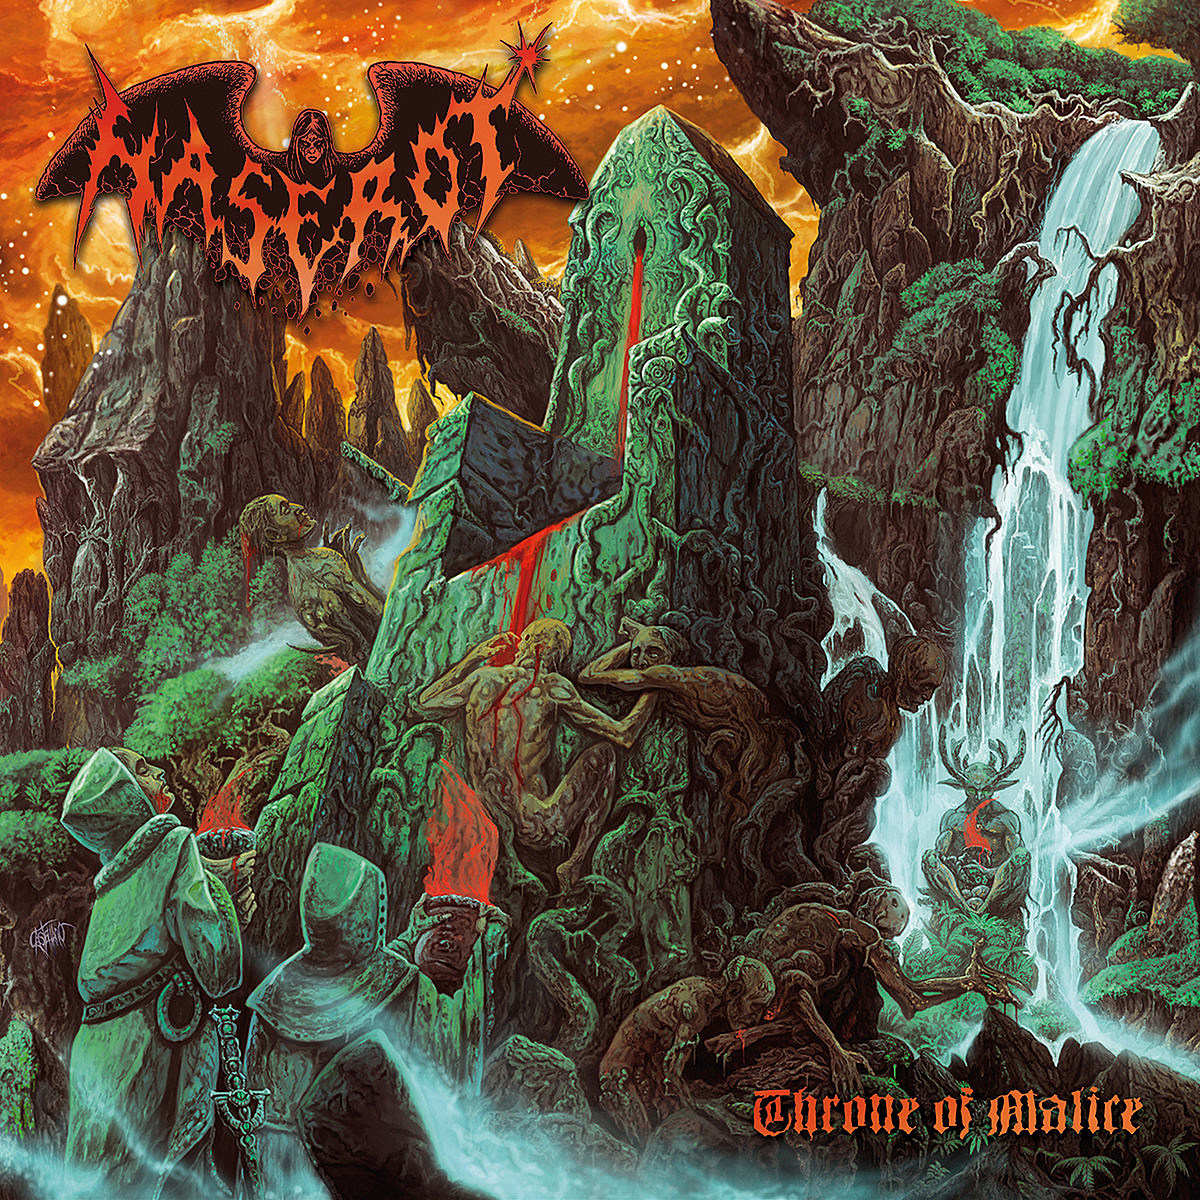 Haserot Throne of Malice